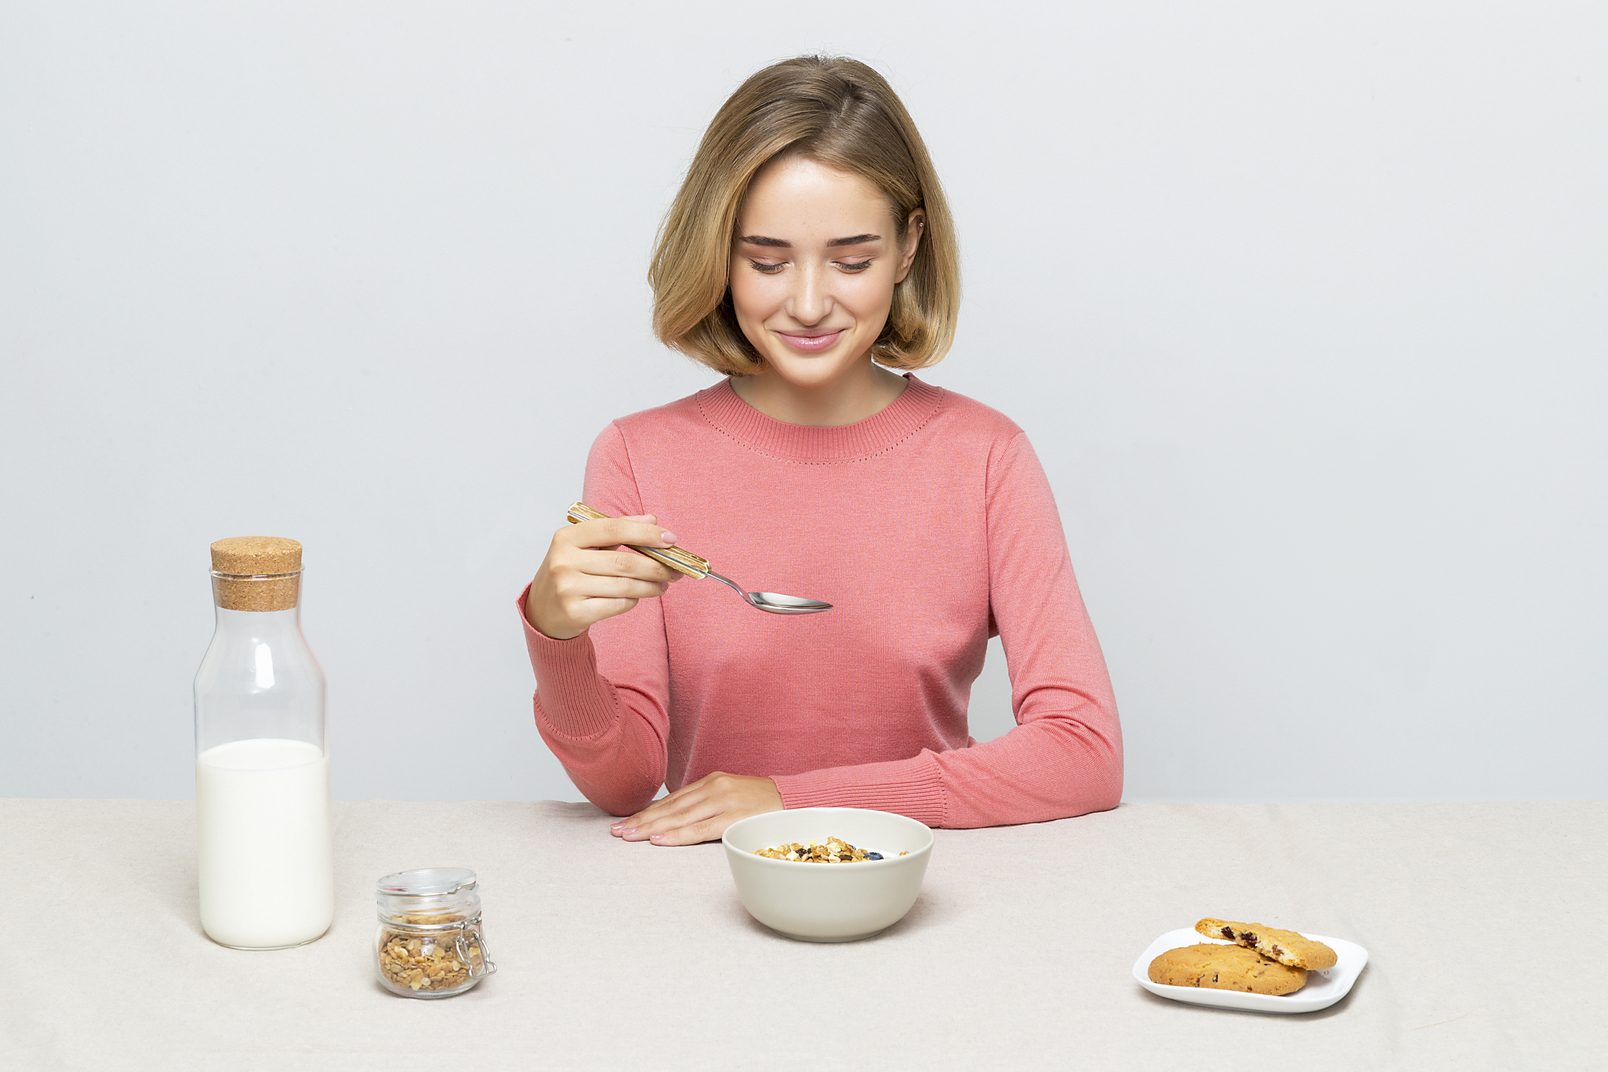 World milk day 2021: girl in a pink sweater eating muesli. There is a bottle of milk nearby